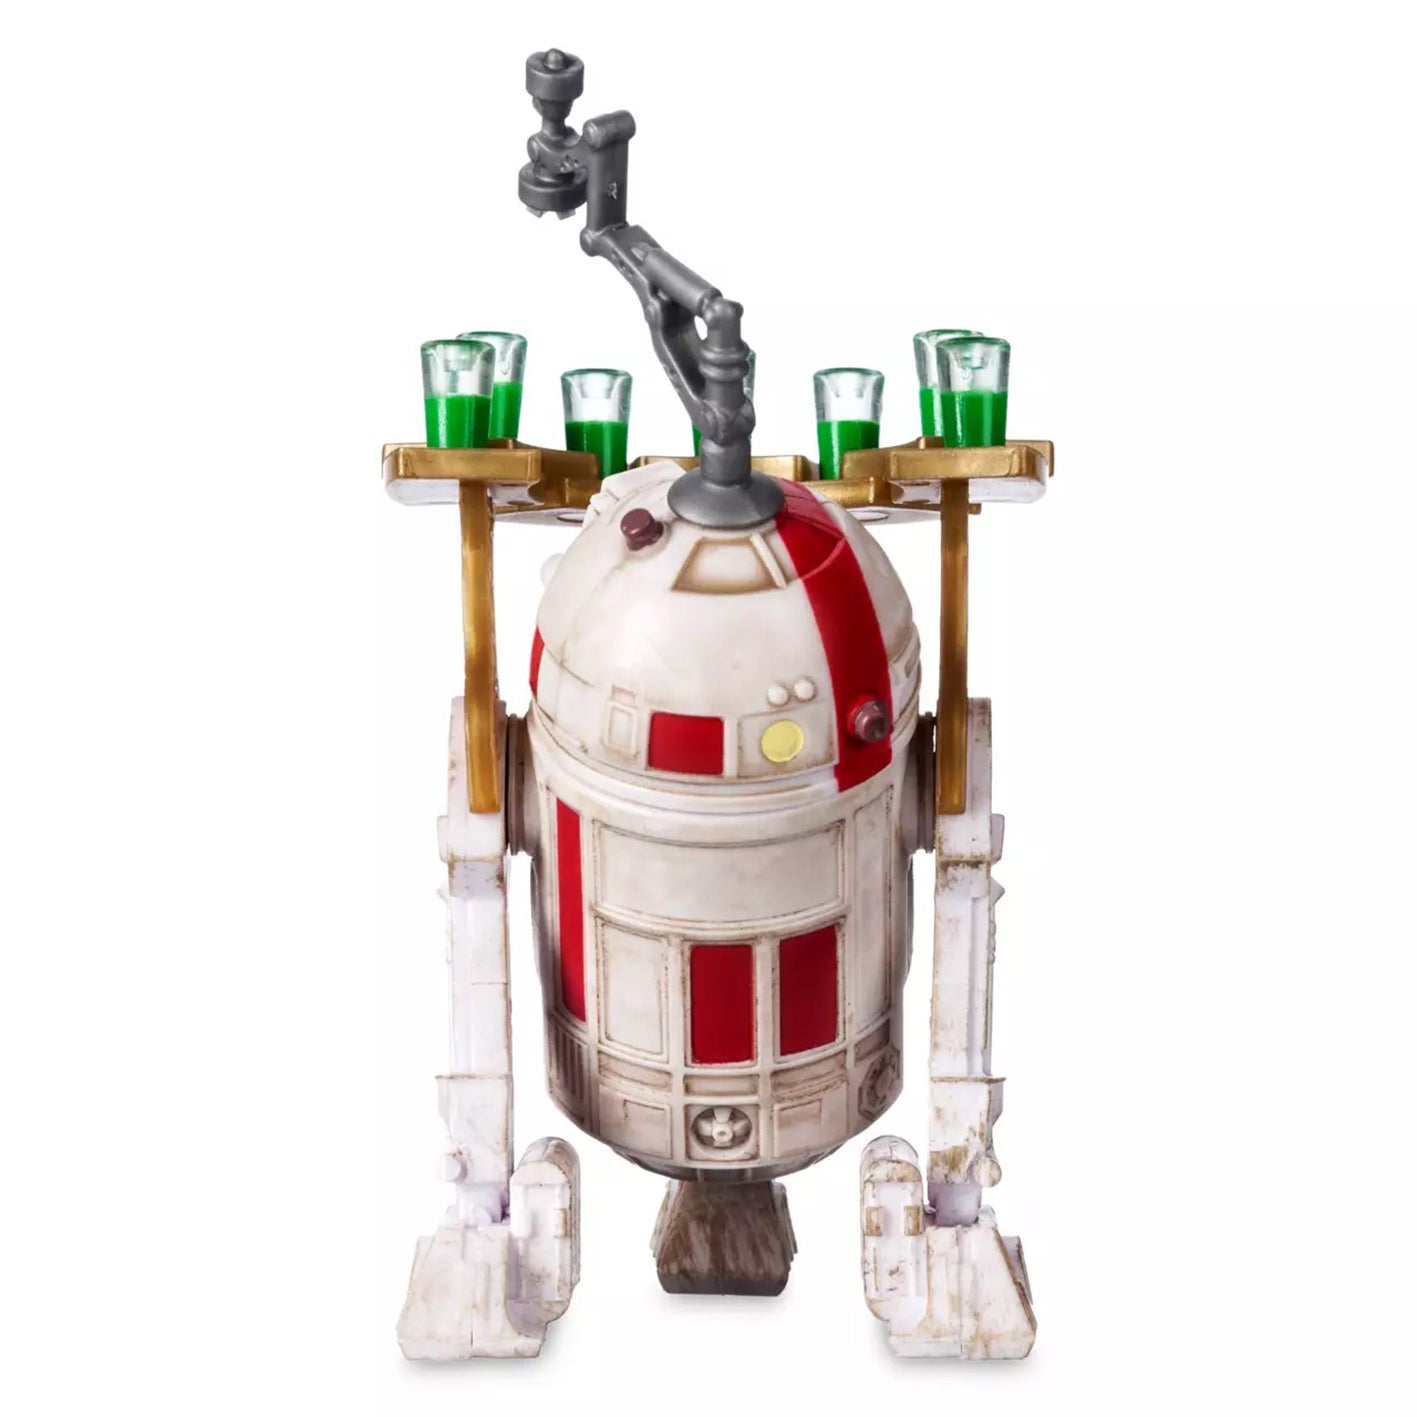 R2-S4M (Droid Factory), Star Wars: The Vintage Collection